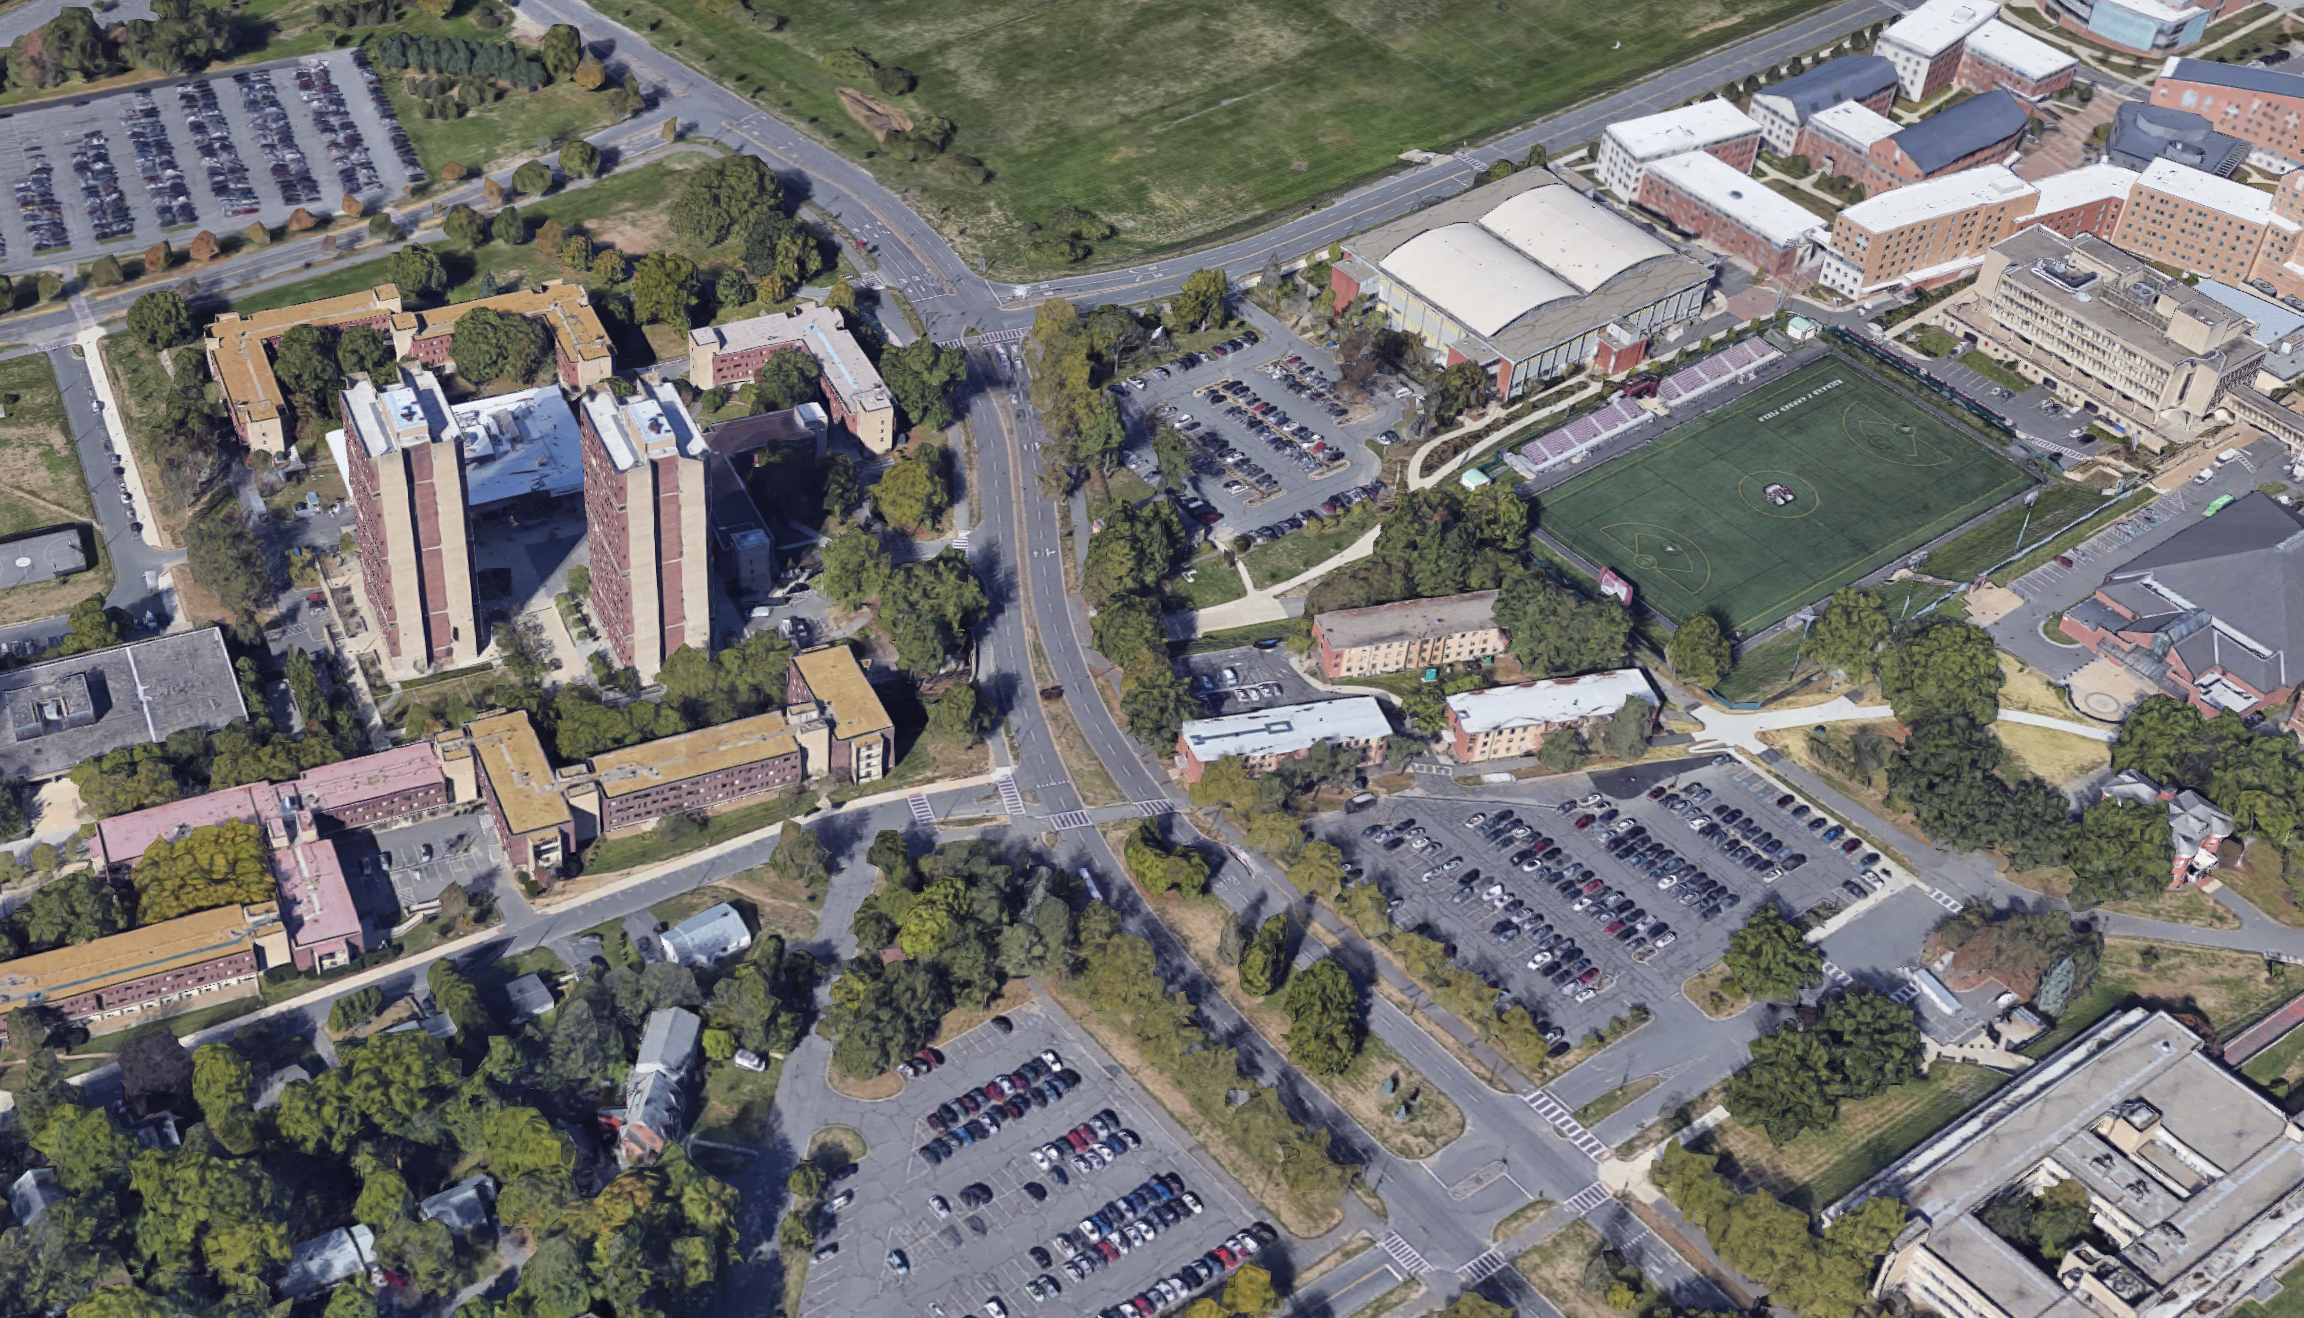 An aerial view of the UMass Amherst campus showing the 4-lane Massachusetts Avenue roadway dividing the residential dormitories (south of the road) from the campus's academic buildings (to the north).